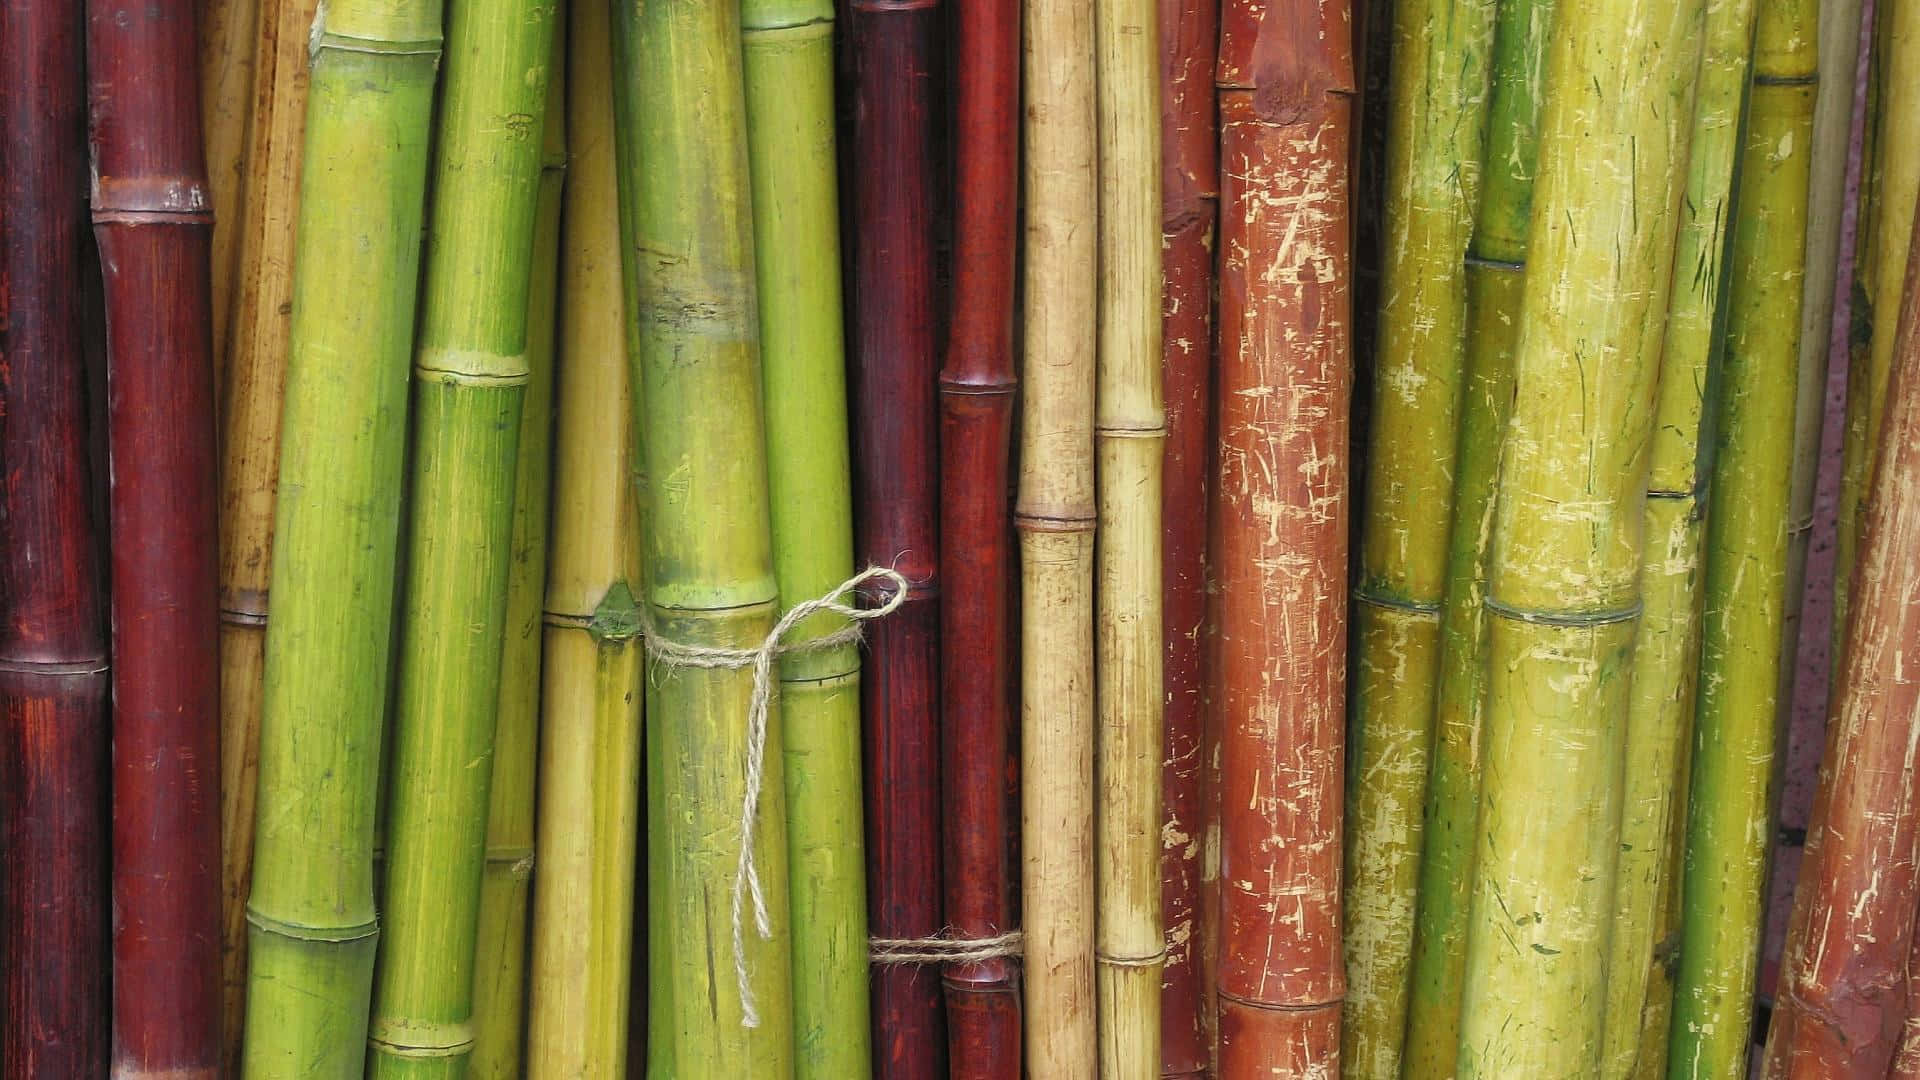 Enjoy the Natural Beauty of Bamboo